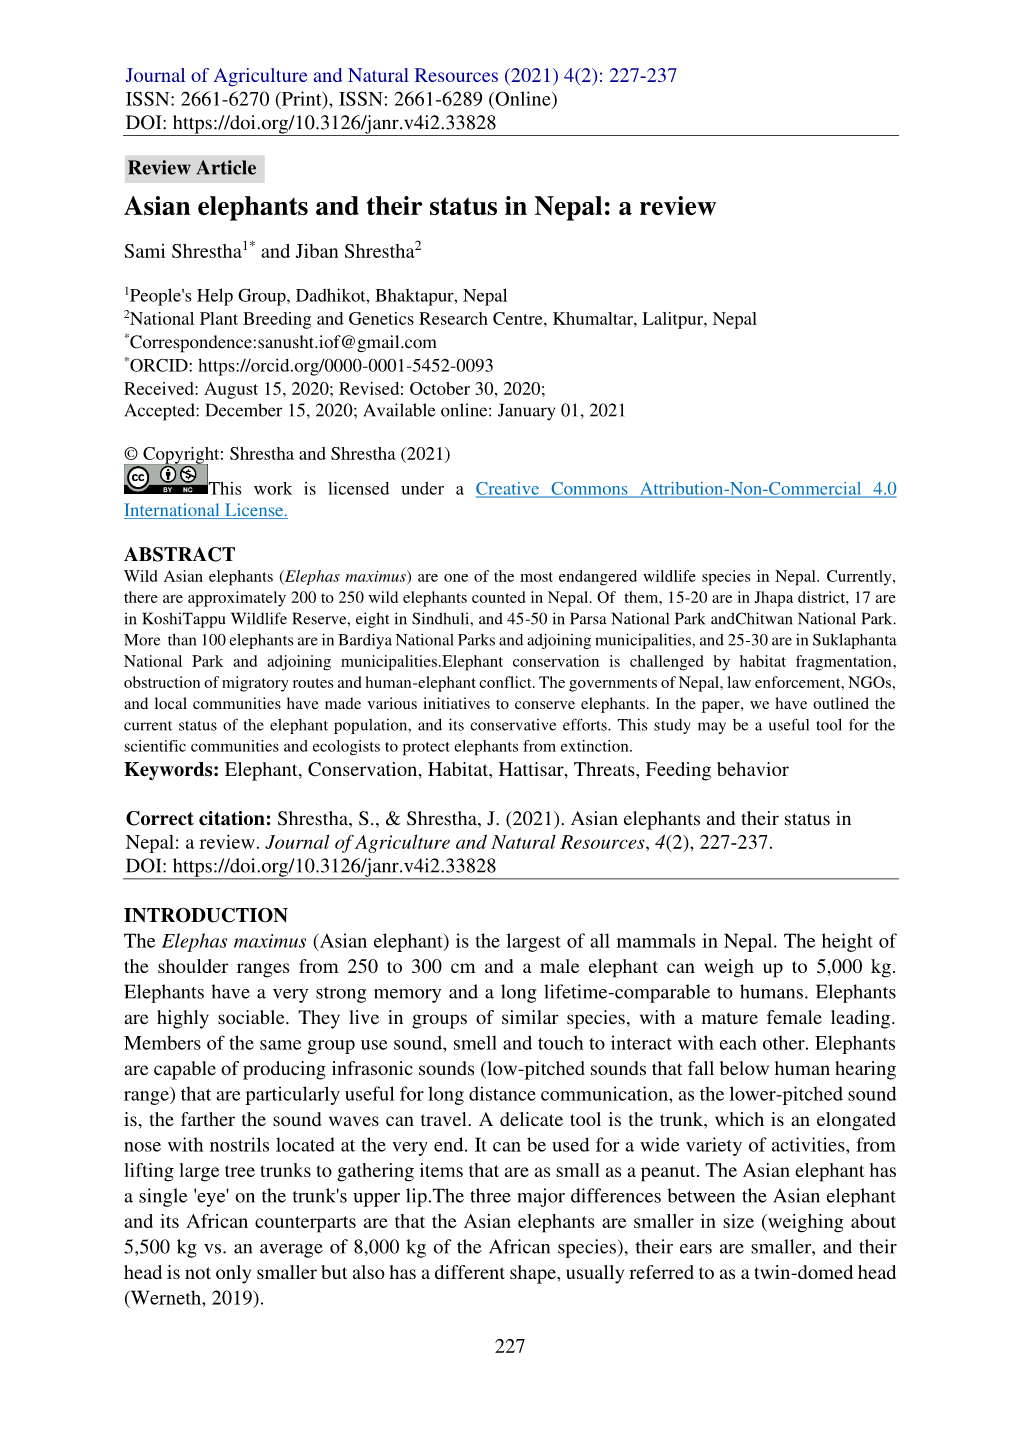 Asian Elephants and Their Status in Nepal: a Review